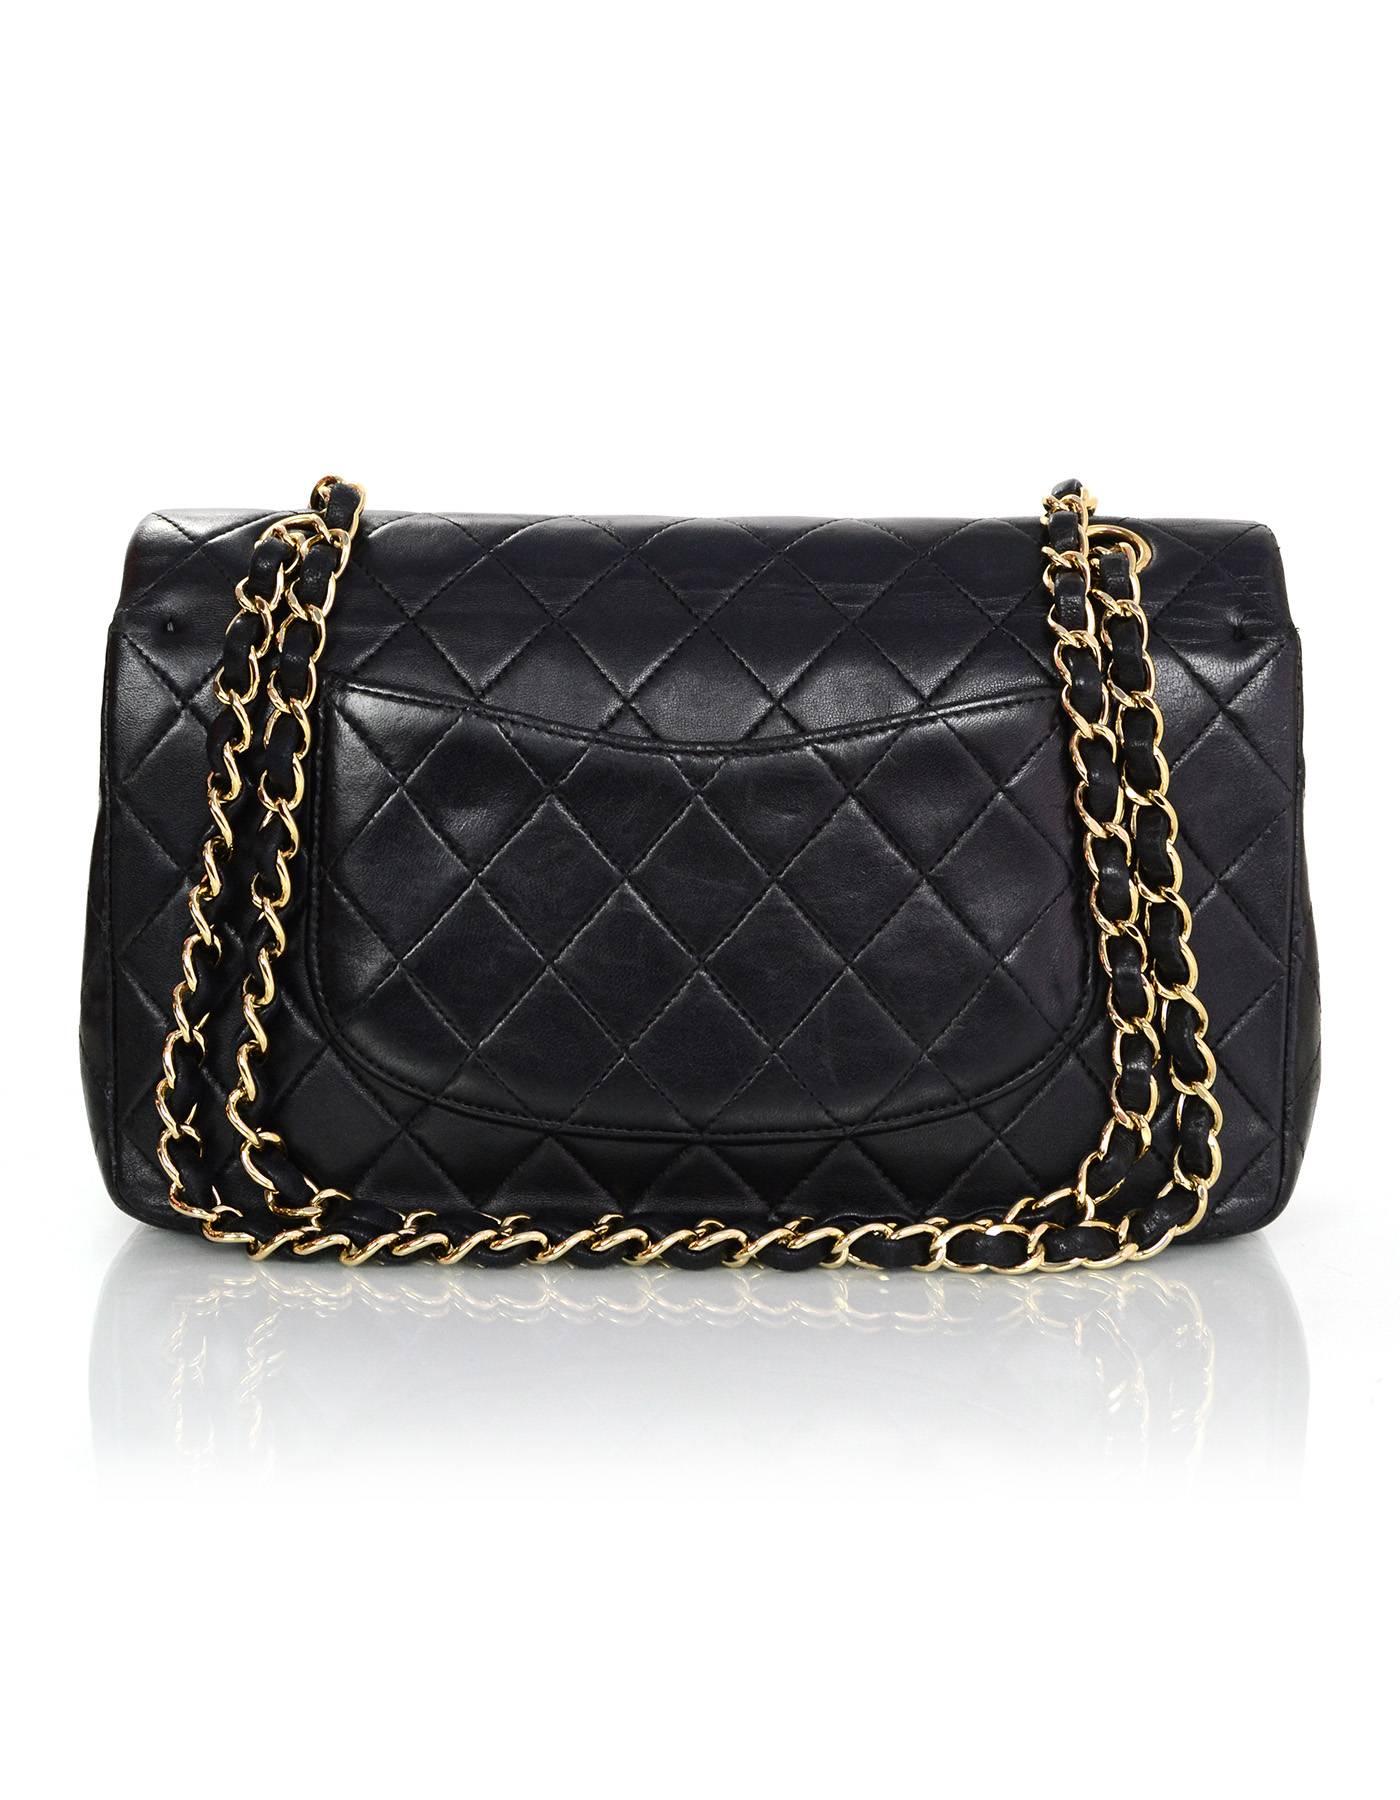 Chanel Black Quilted Classic Medium Double Flap Bag

Made In: France
Year of Production: 2002-2003
Color: Black
Hardware: Goldtone
Materials: Lambskin
Lining: Black and burgundy leather
Closure/opening: Double flap top with snap and CC twist